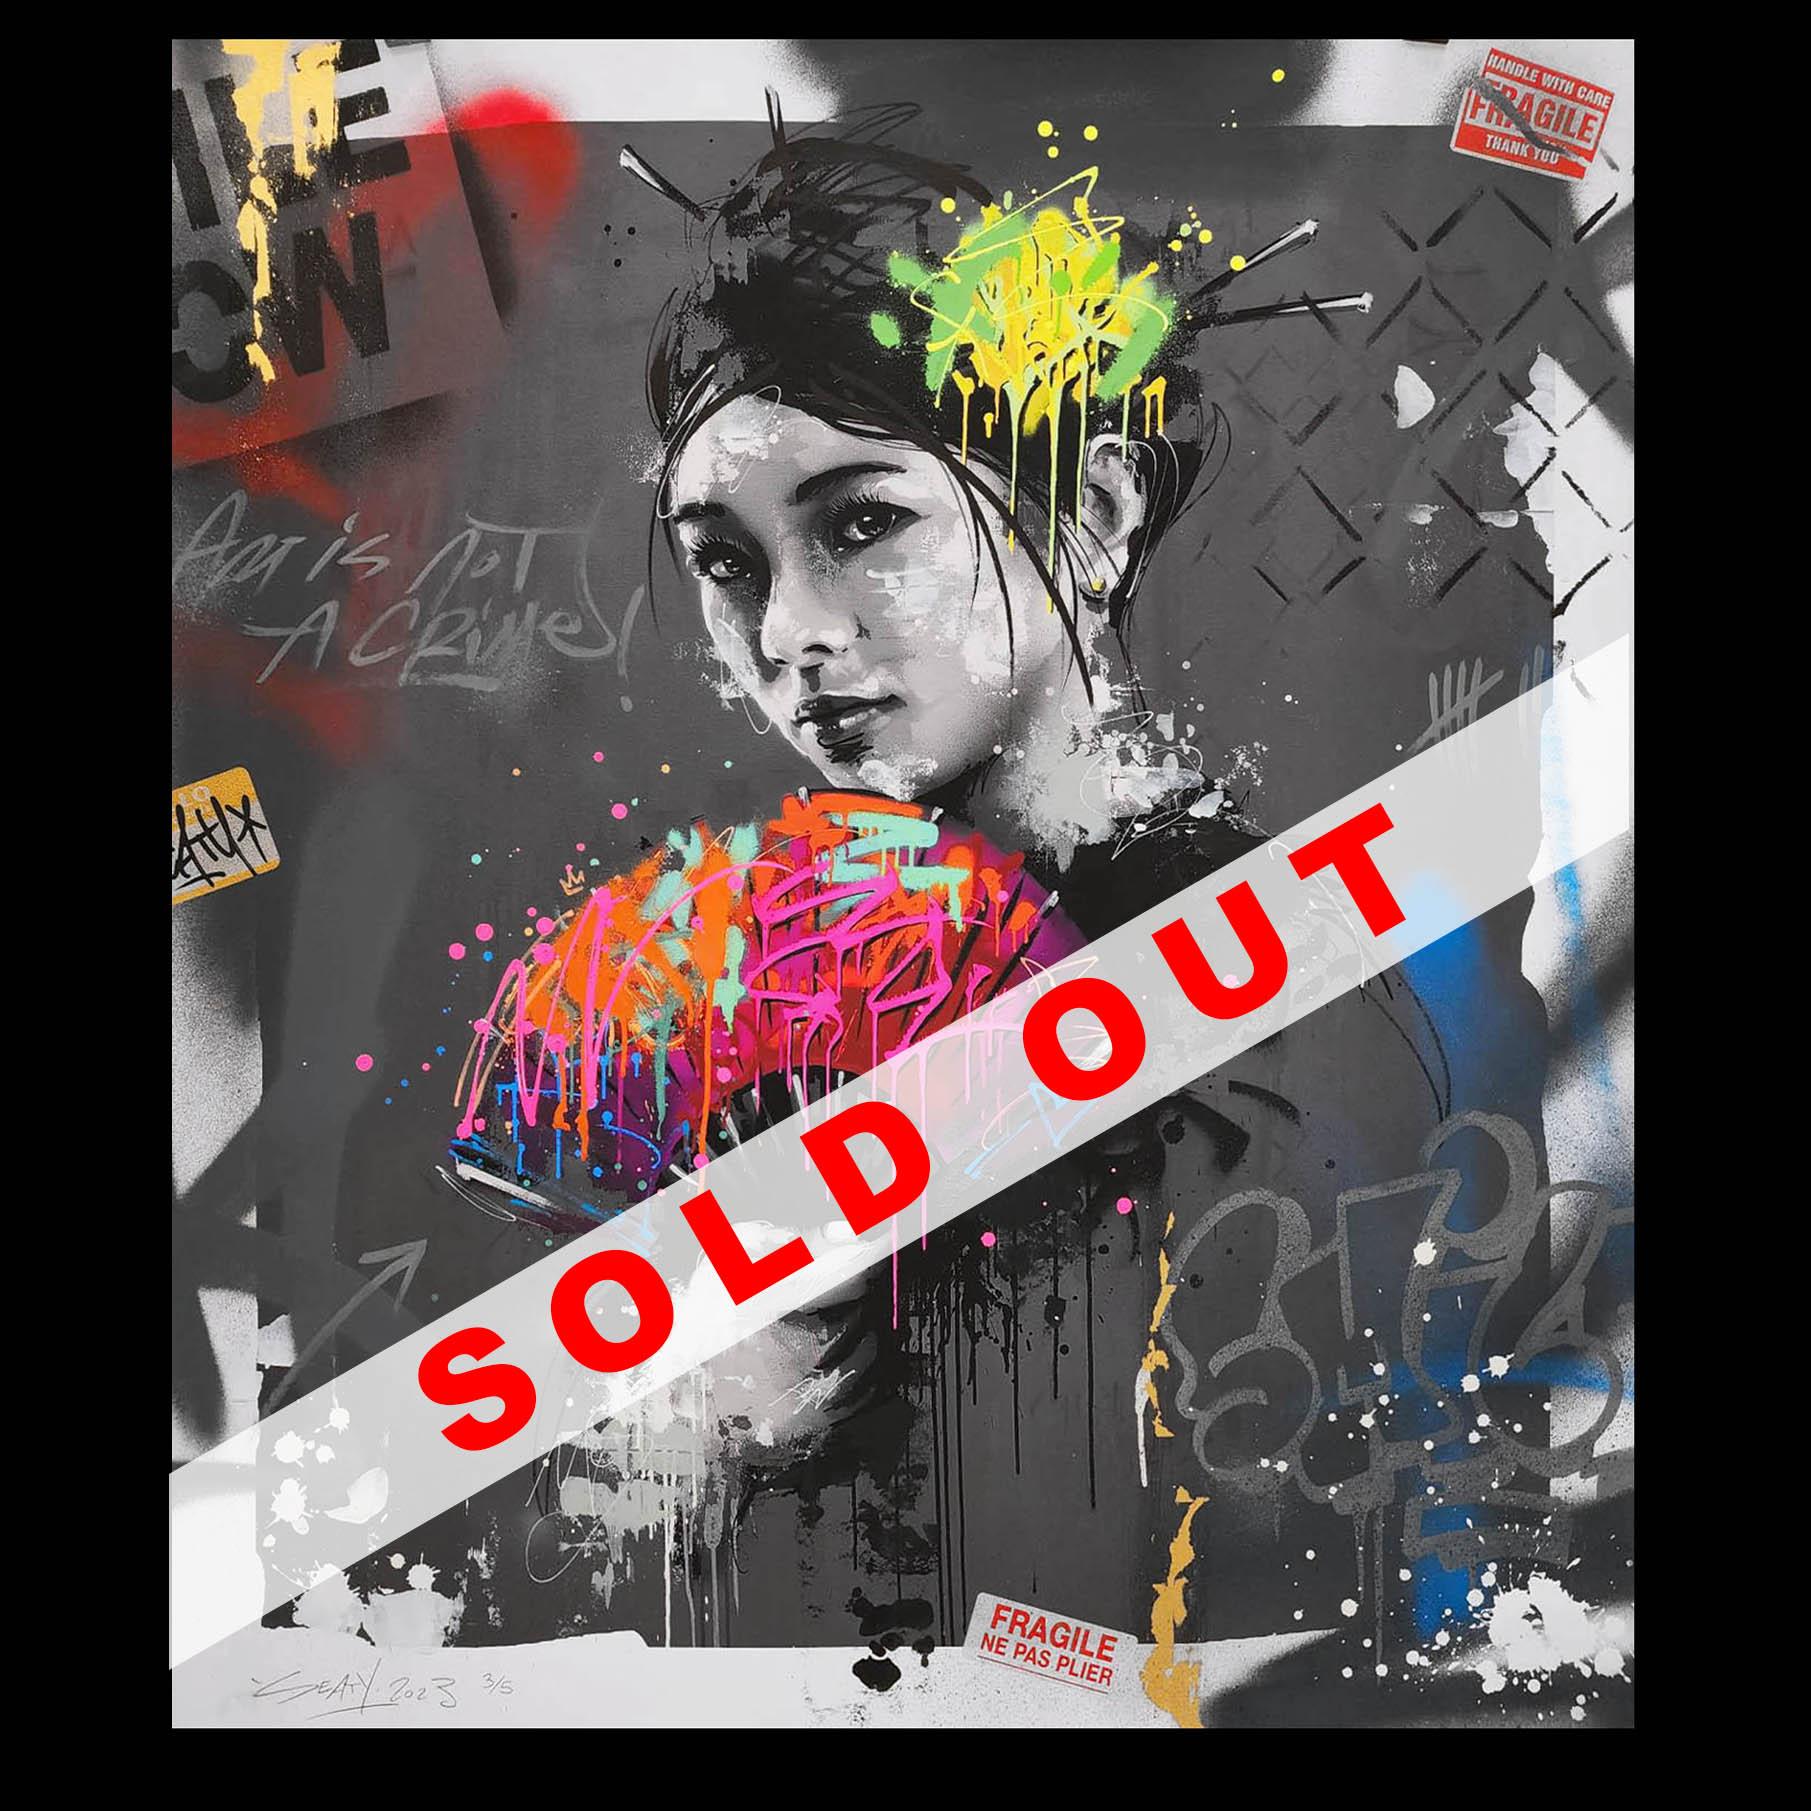 Sold out site 8